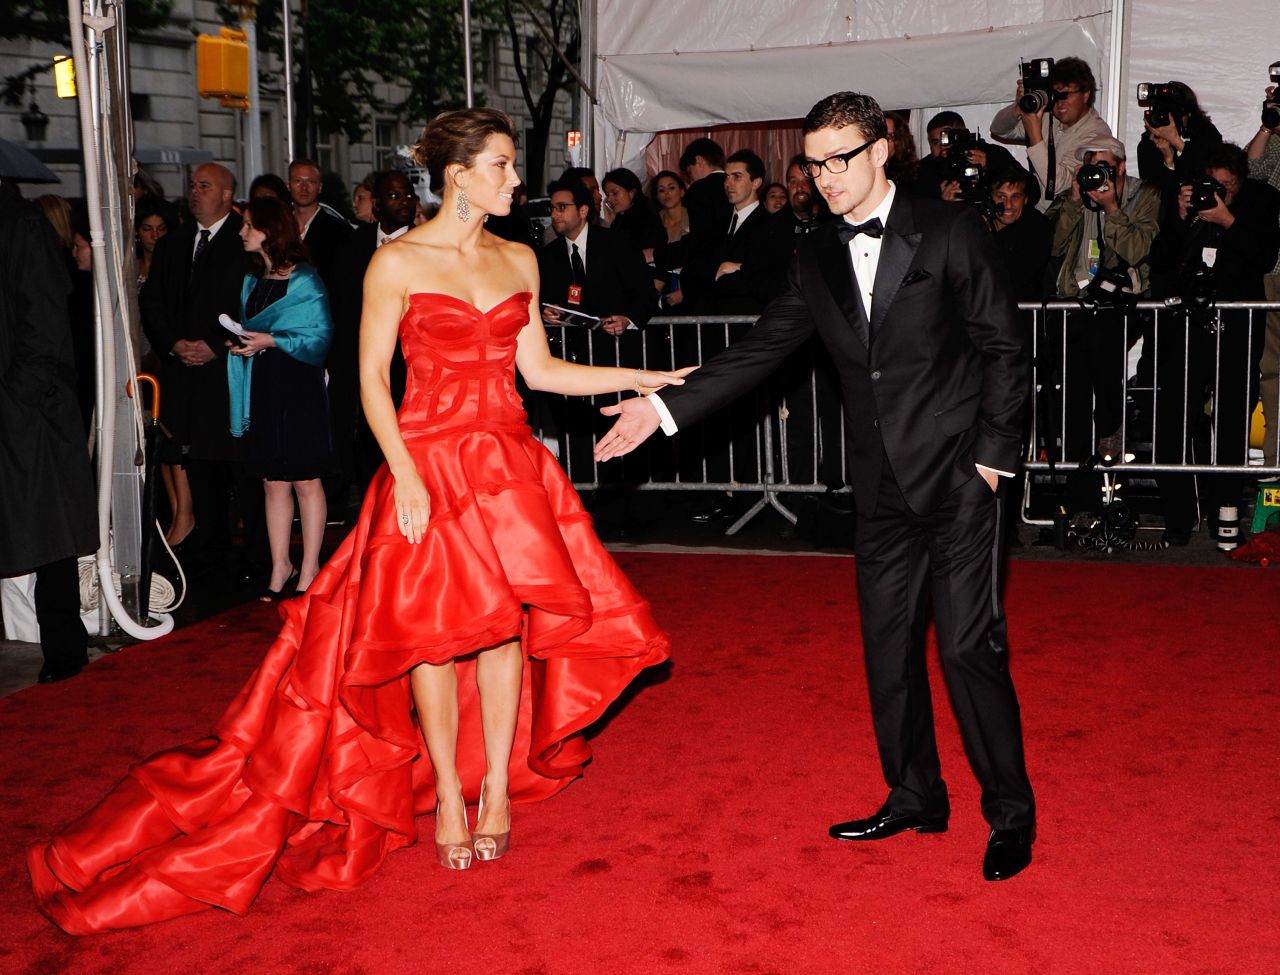 Timberlake and actress Jessica Biel, who were first linked in 2007, attend the Met Gala in 2009.